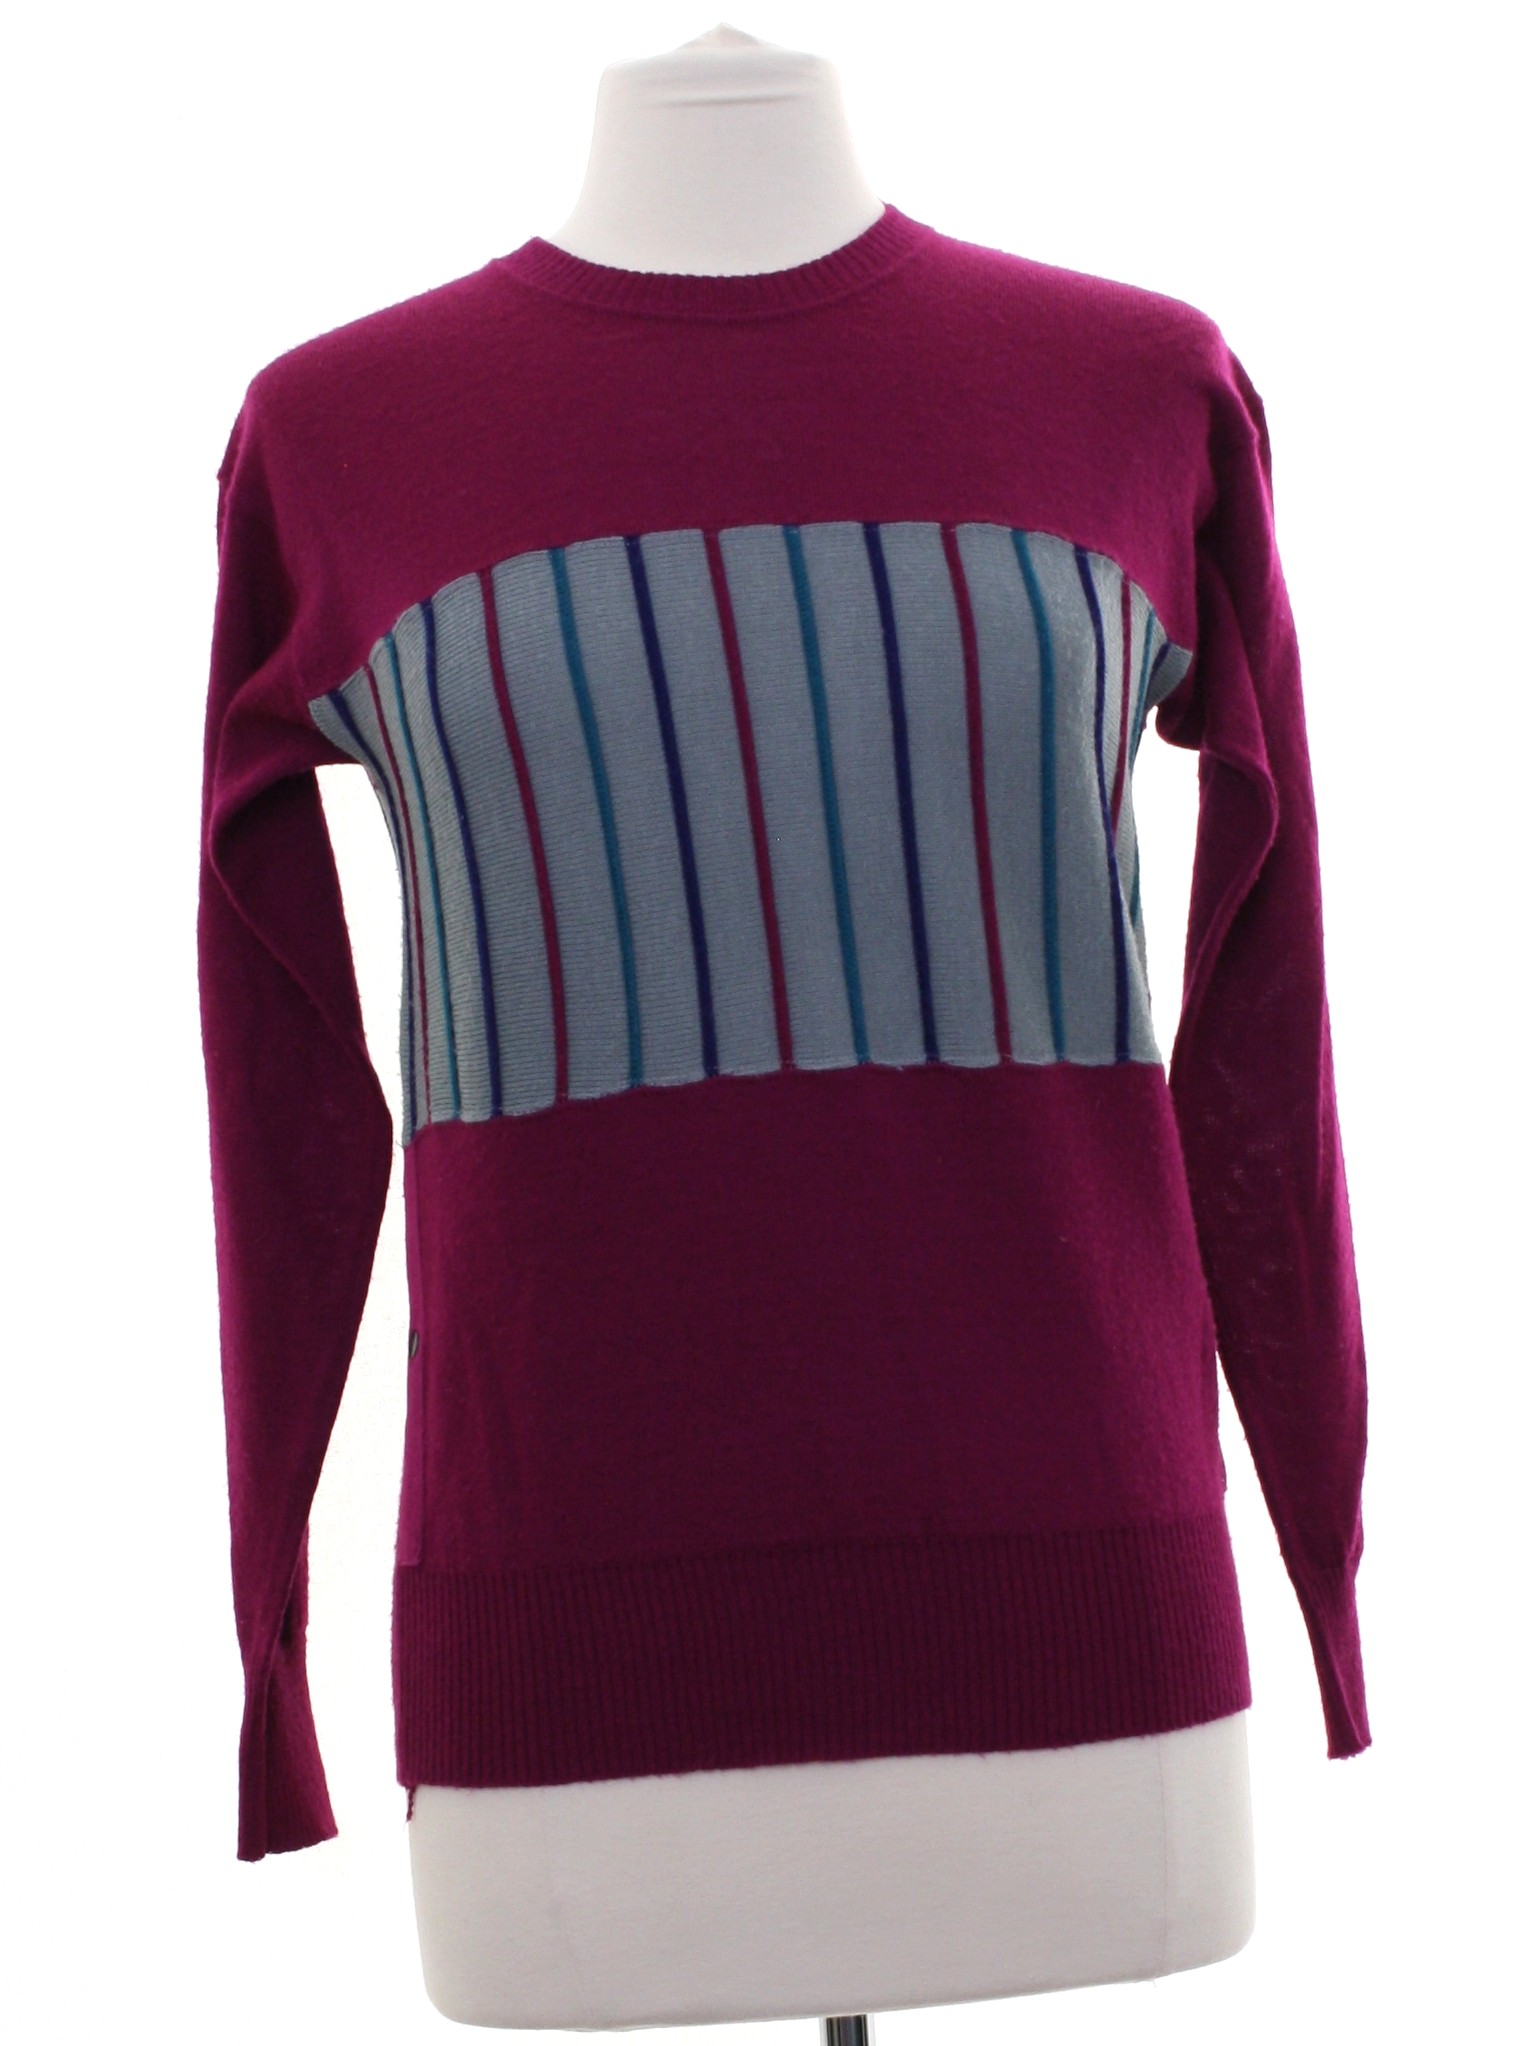 Retro 1980s Sweater: 80s -Sweater Bee- Womens Violet background acrylic ...